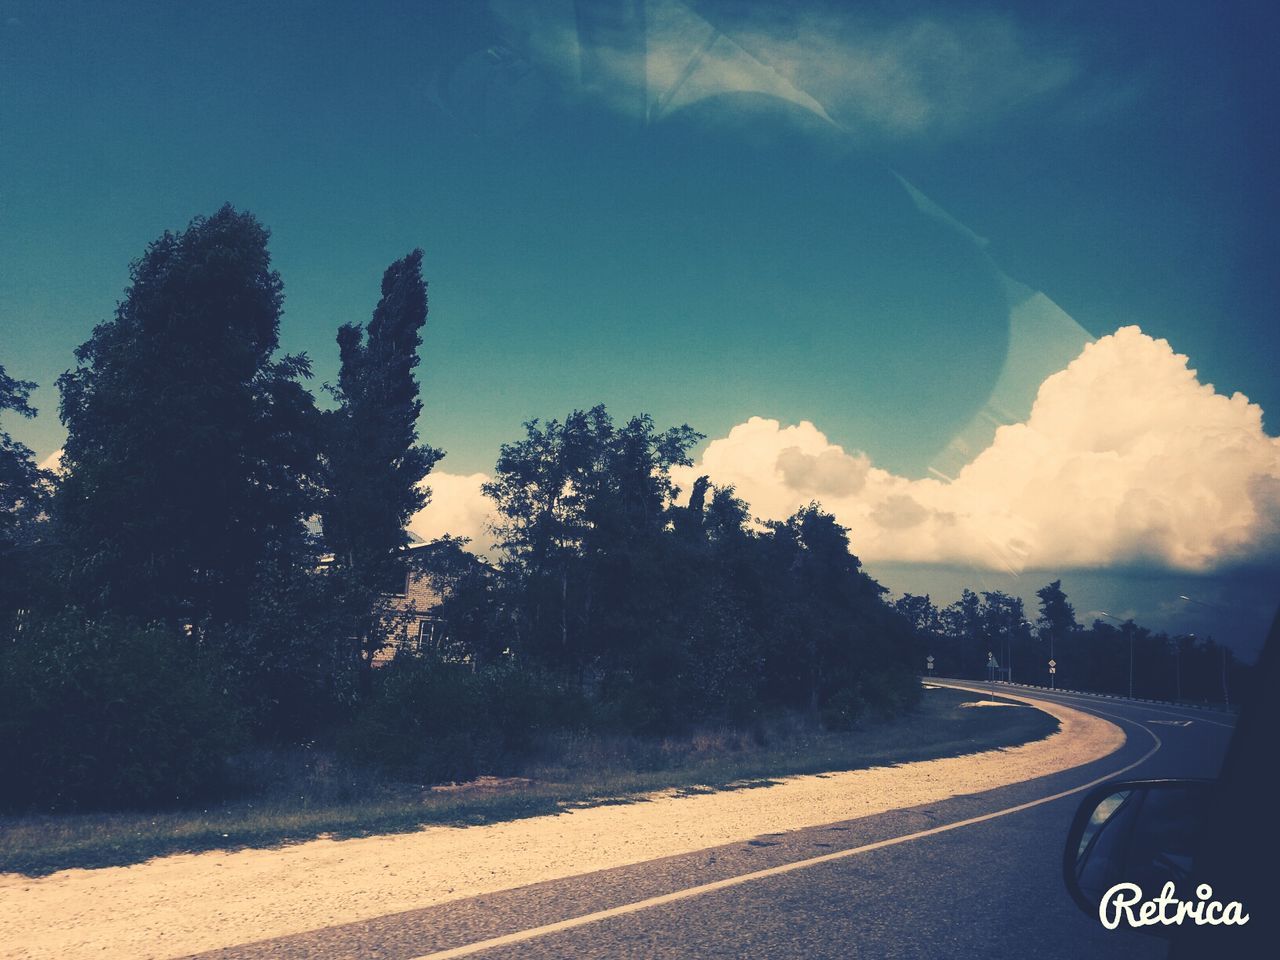 transportation, road, road marking, sky, tree, the way forward, street, car, cloud - sky, cloud, blue, diminishing perspective, country road, sunlight, nature, outdoors, vanishing point, no people, land vehicle, asphalt